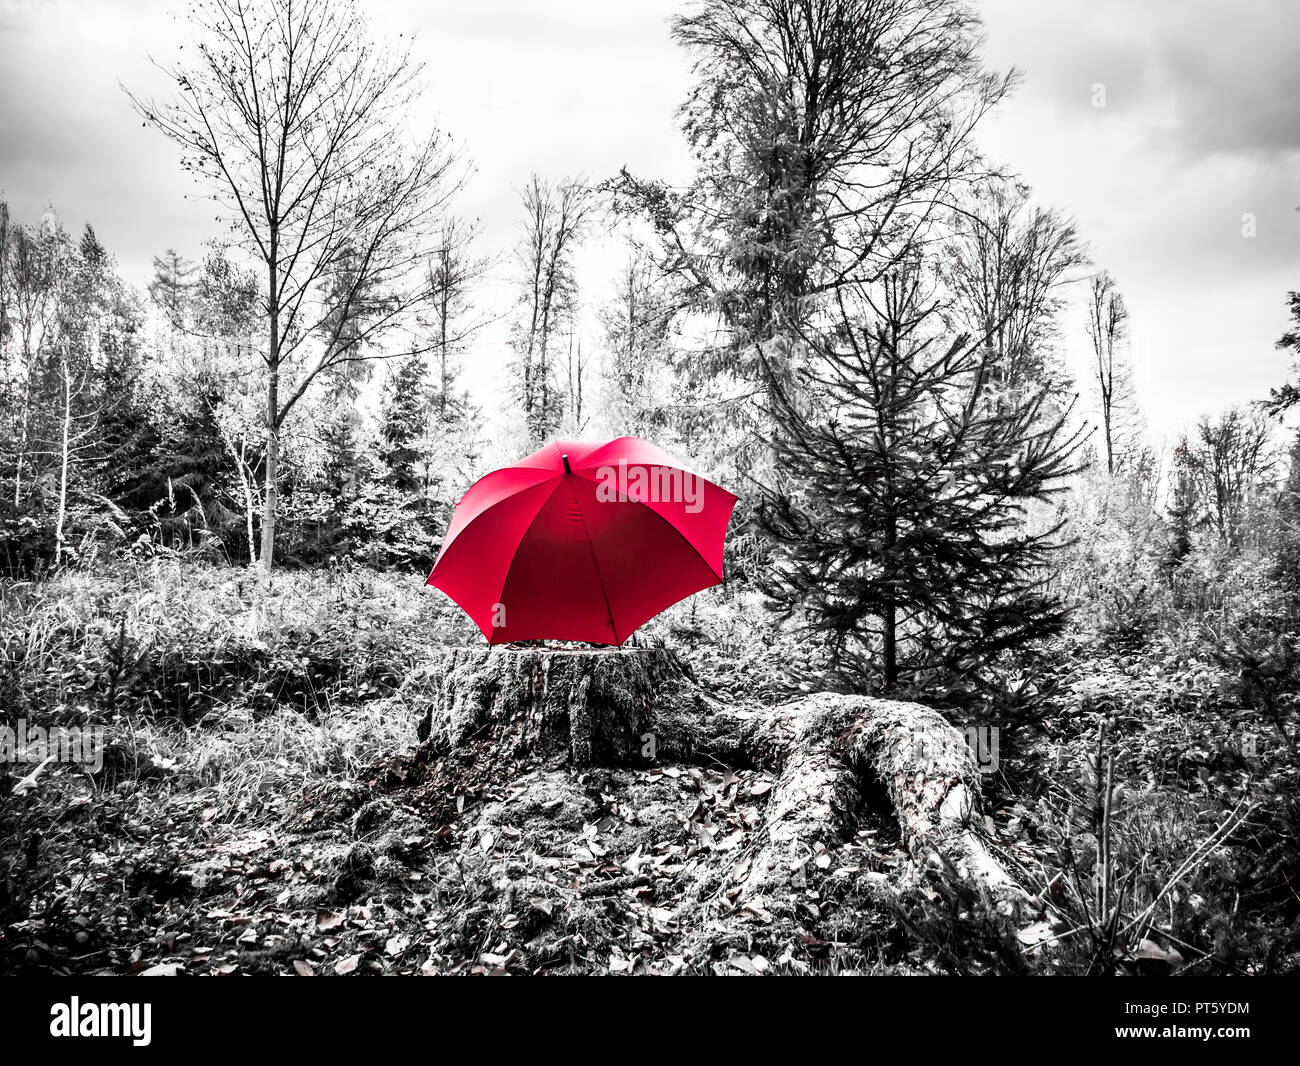 black and white with red umbrella photography